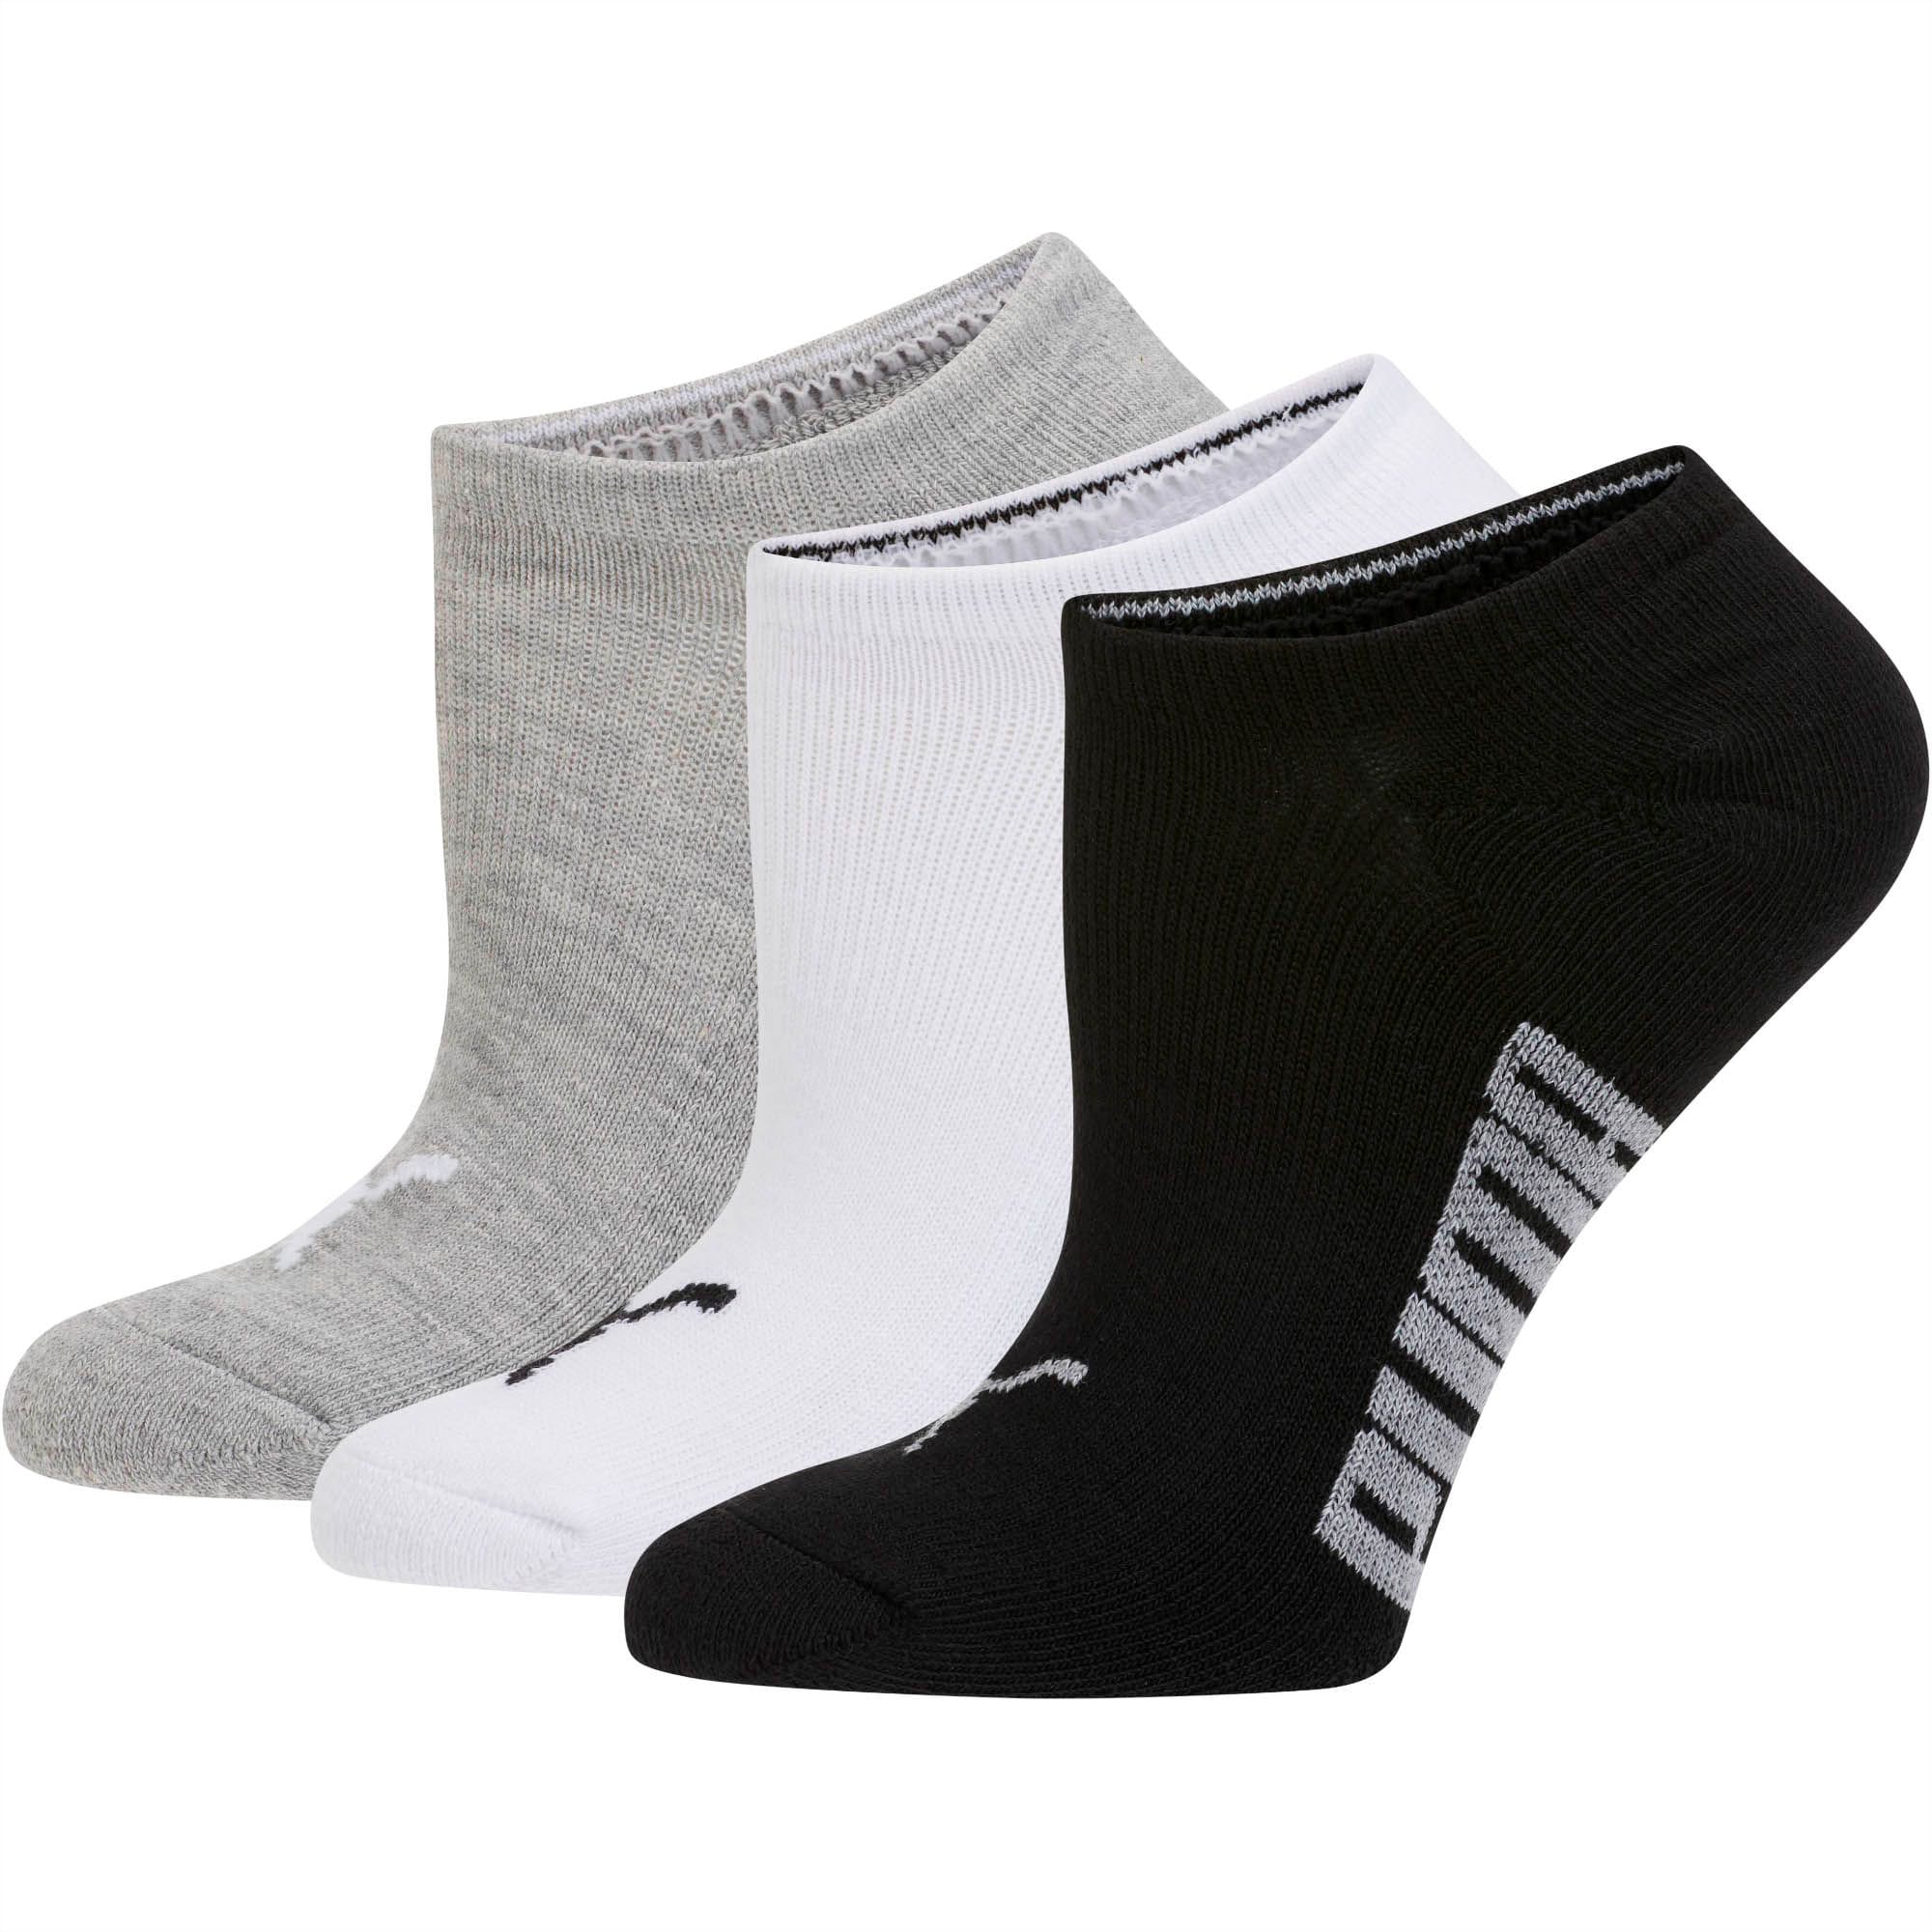 Women’s Invisible No Show Socks (3 Pack)